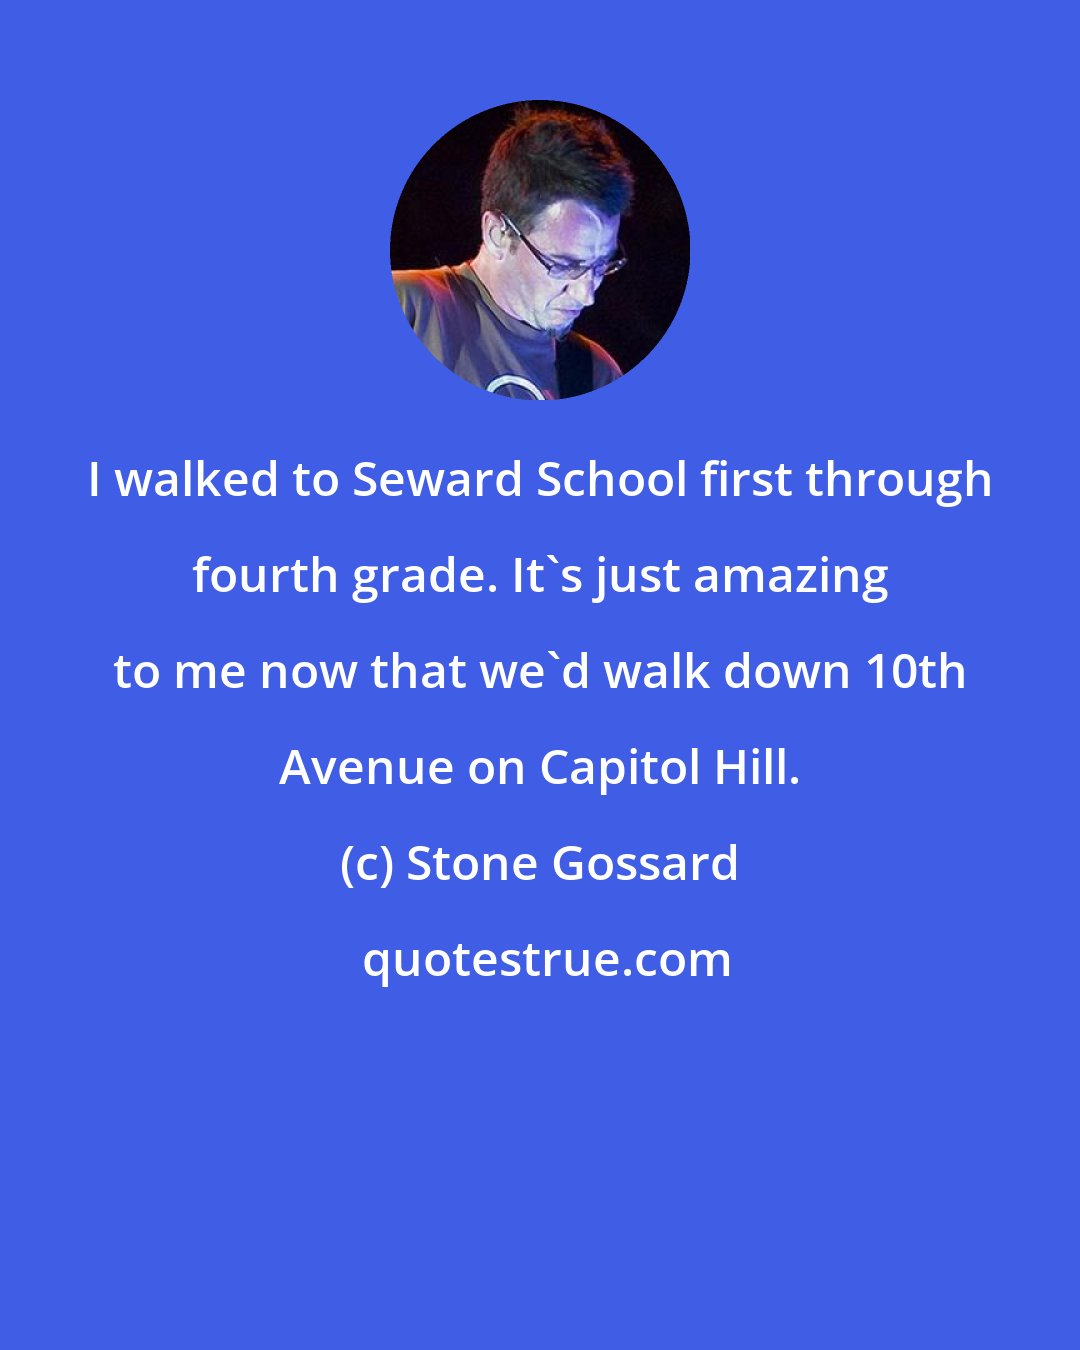 Stone Gossard: I walked to Seward School first through fourth grade. It's just amazing to me now that we'd walk down 10th Avenue on Capitol Hill.